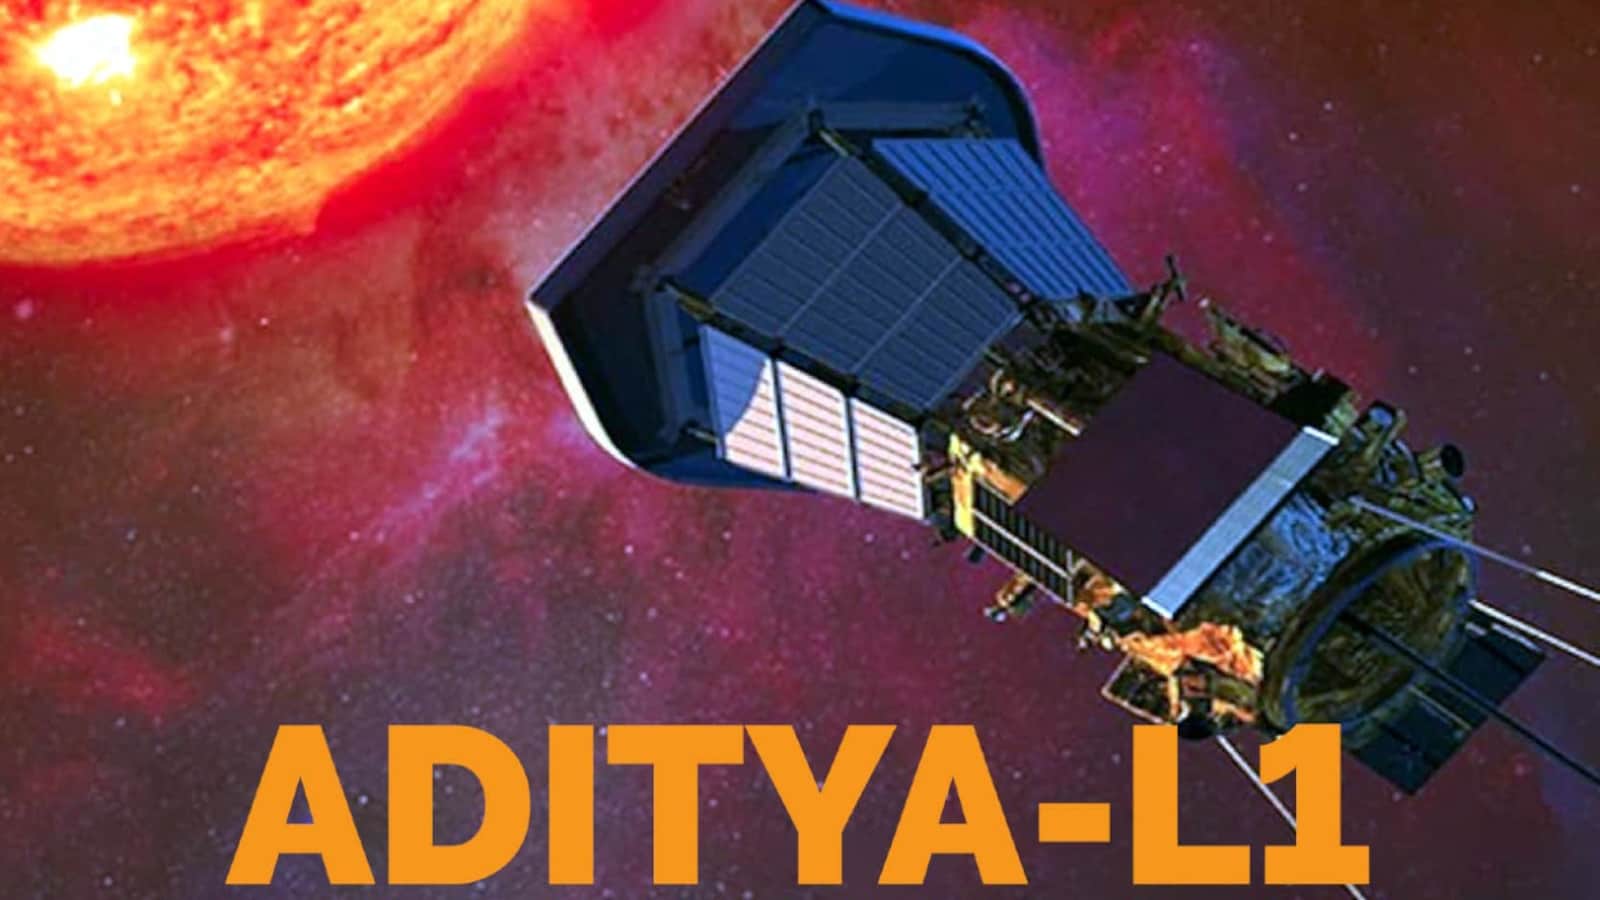 INDIA’S FIRST MISSION TO STUDY SUN, ‘MISSION ADITYAL1’ ENSURE IAS